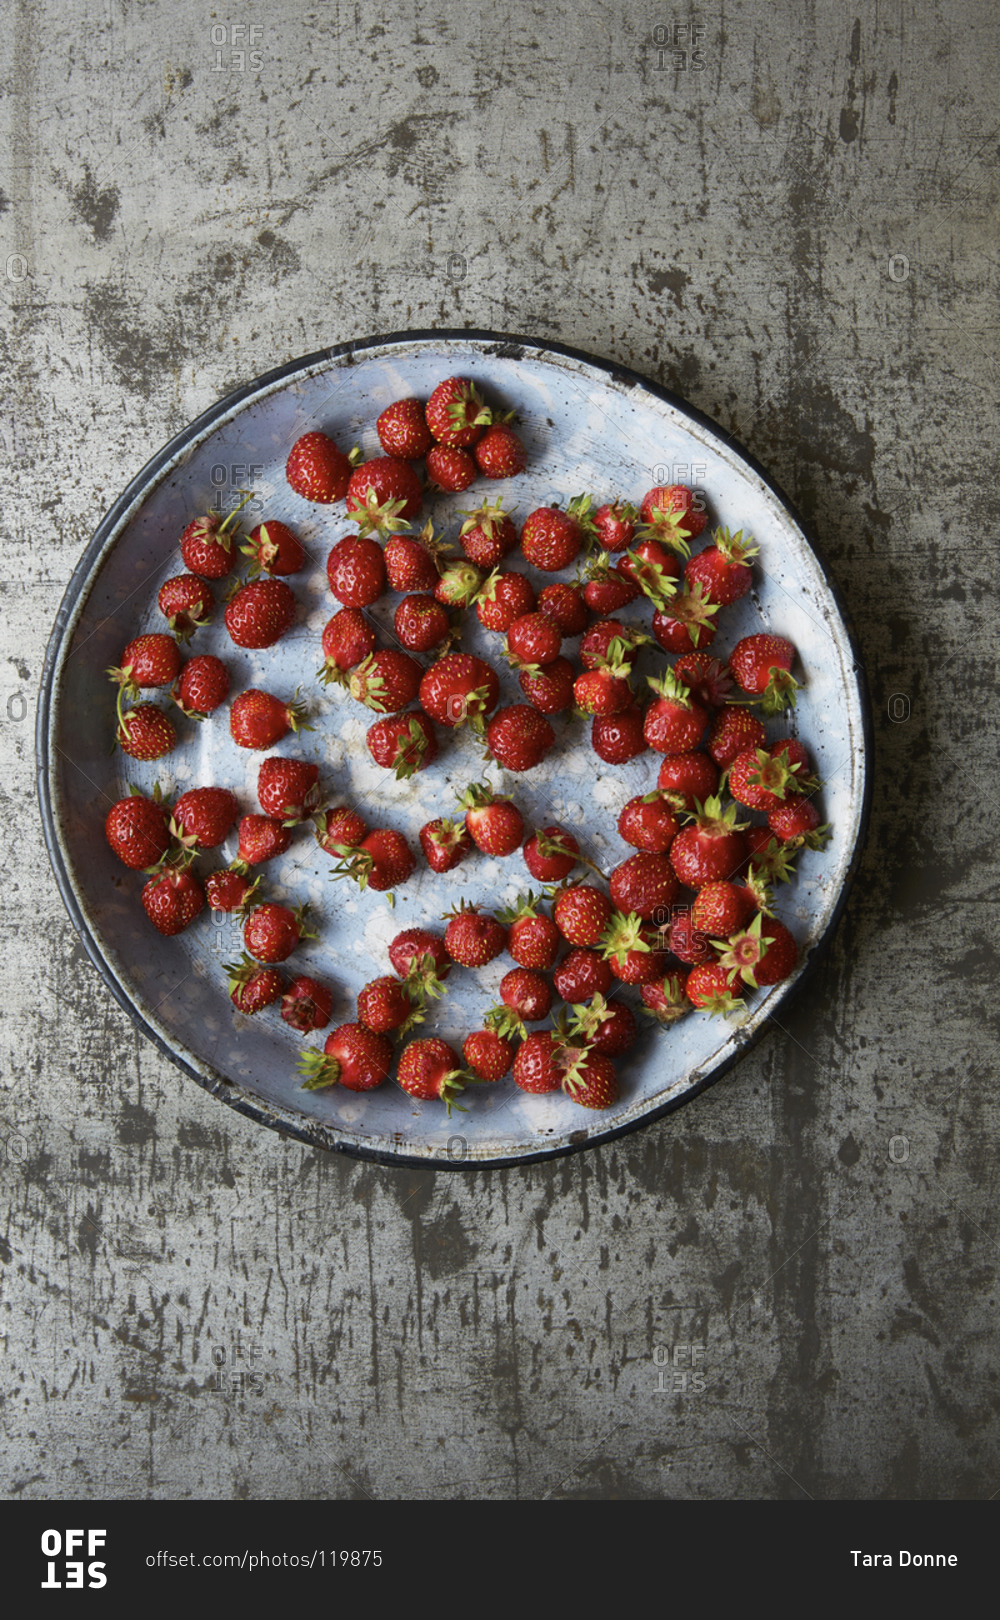 Organic strawberries on a tray